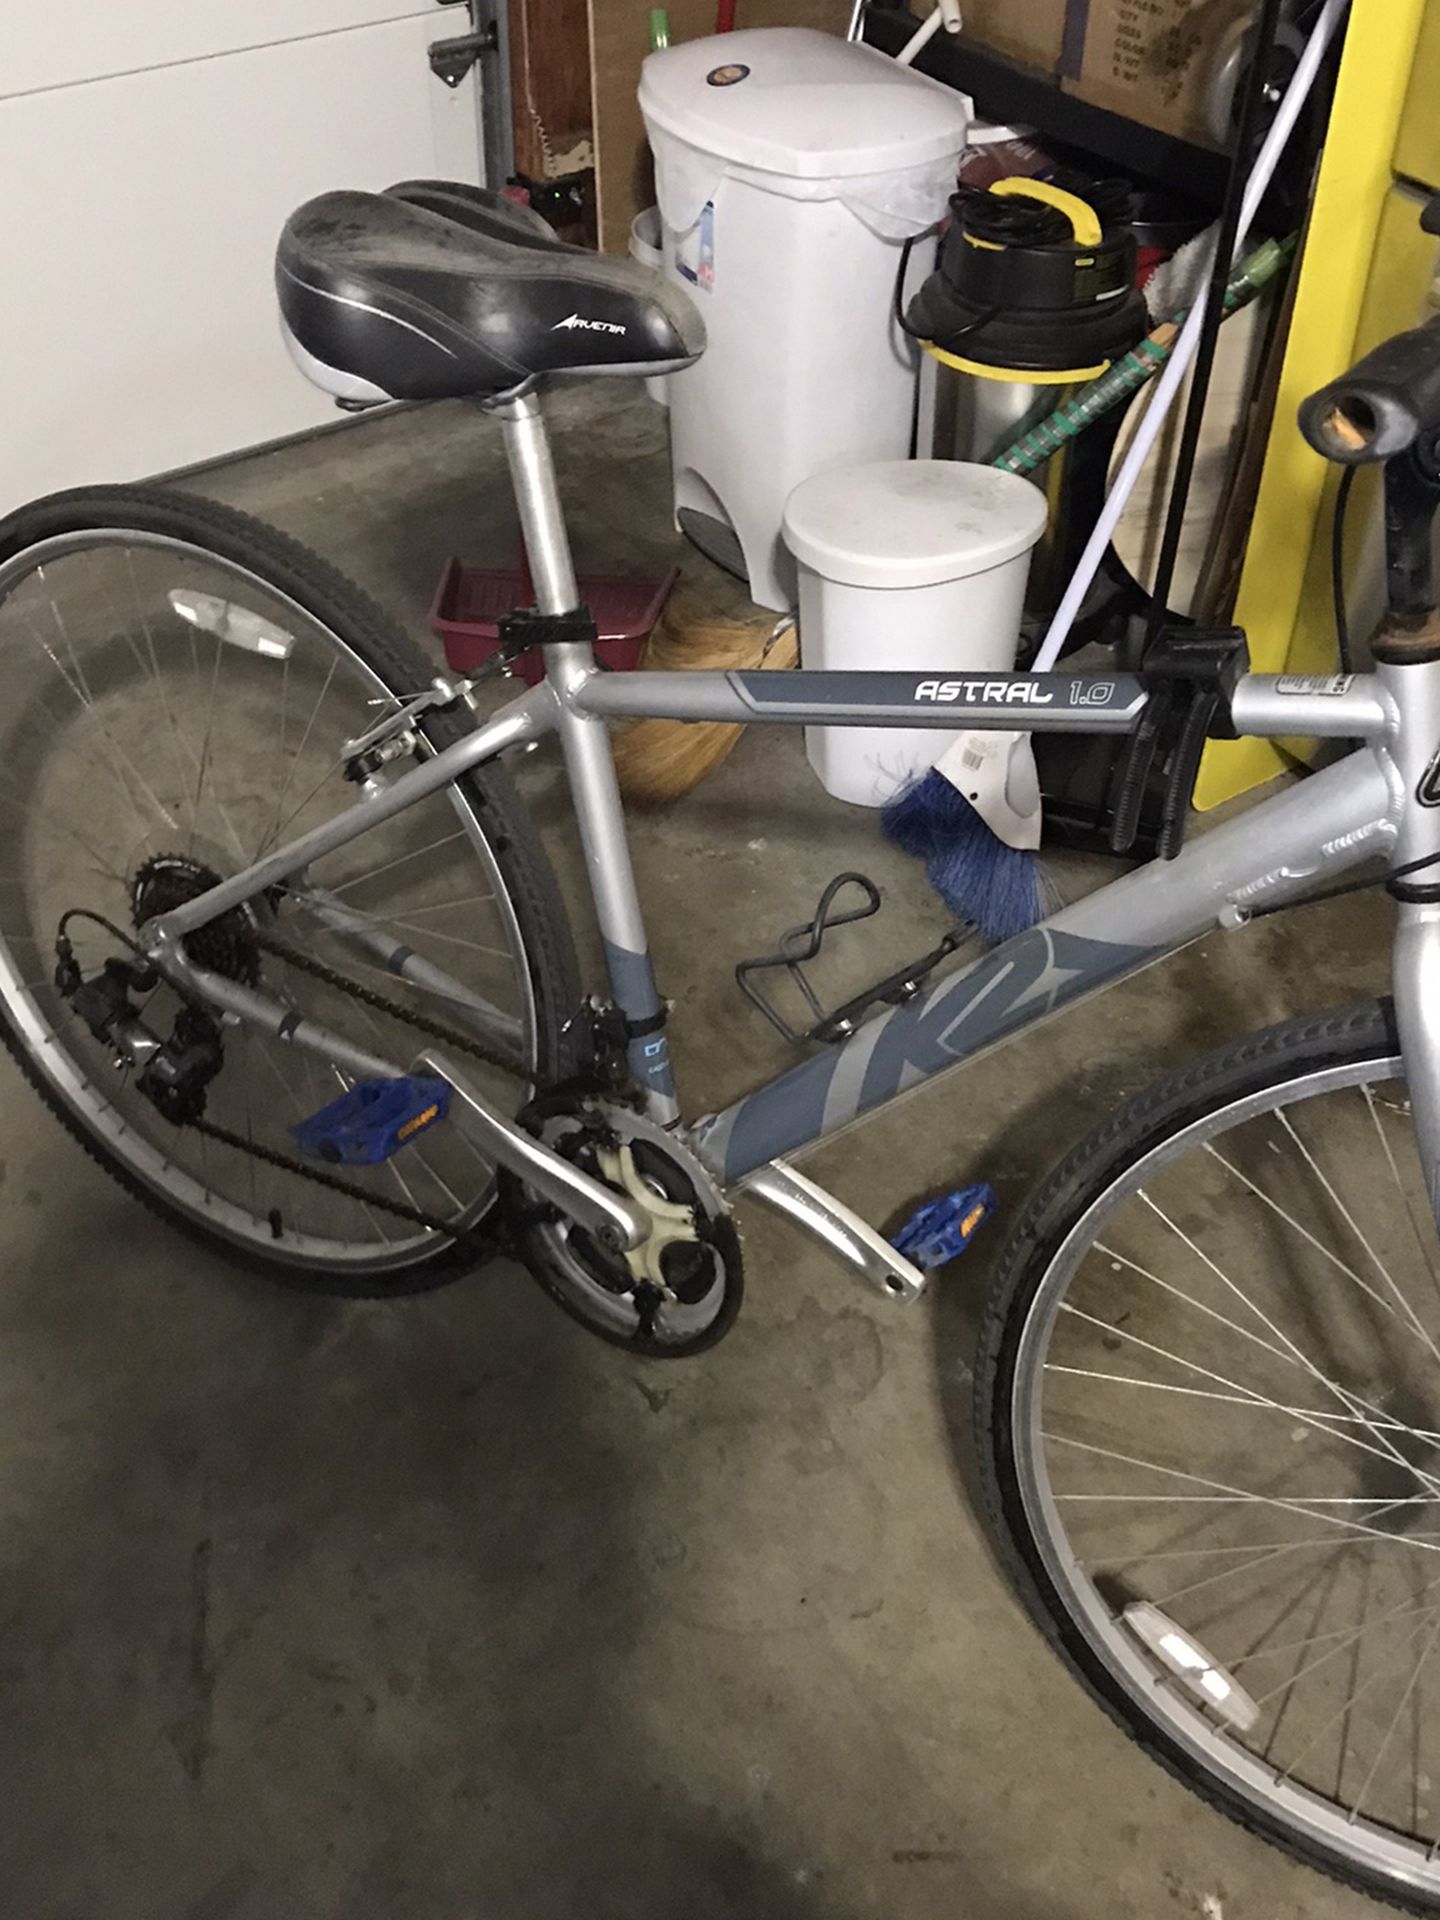 K2 Astral 1.0 Commuter Hybrid Bicycle